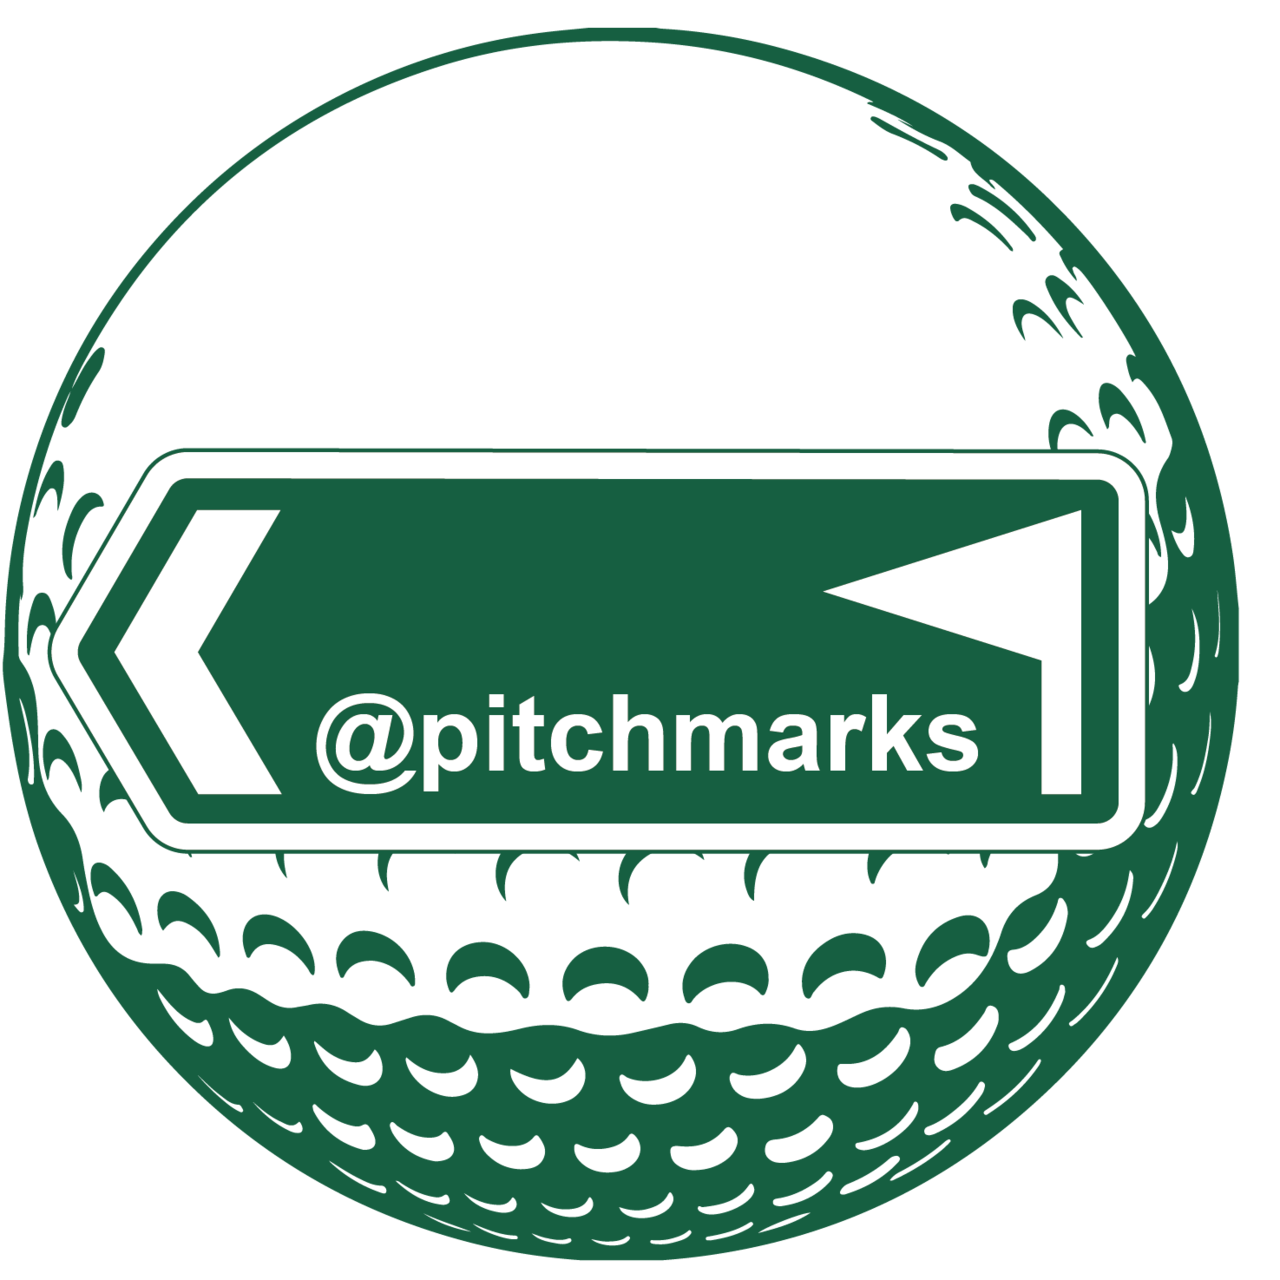 Pitchmarks